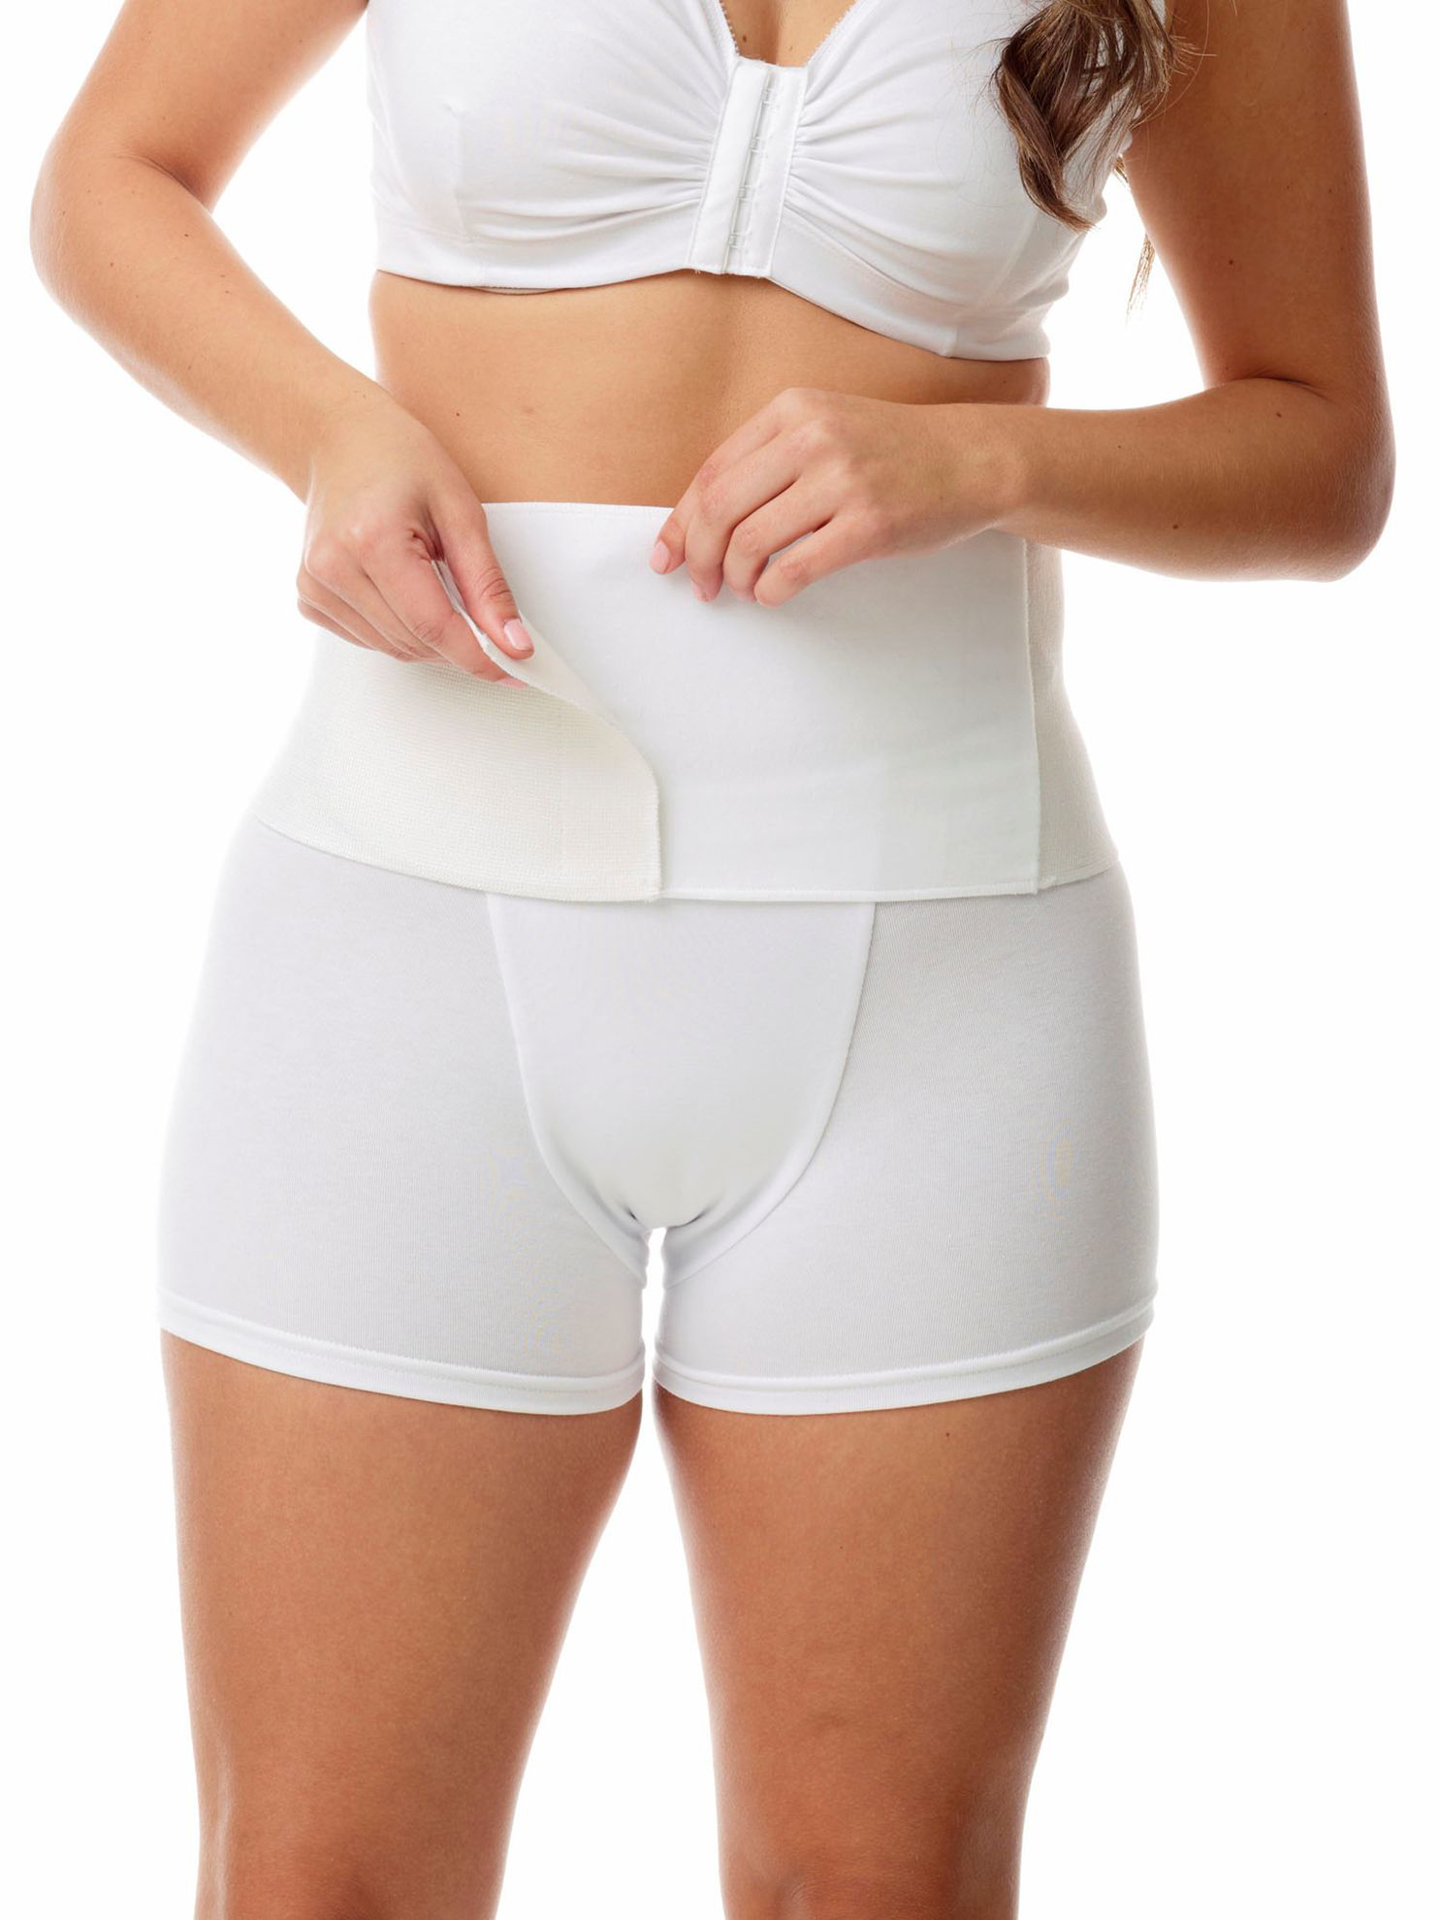 https://www.underworks.com/images/thumbs/0000046_post-delivery-abdominal-binder-6-inch-with-velcro-closure.jpeg